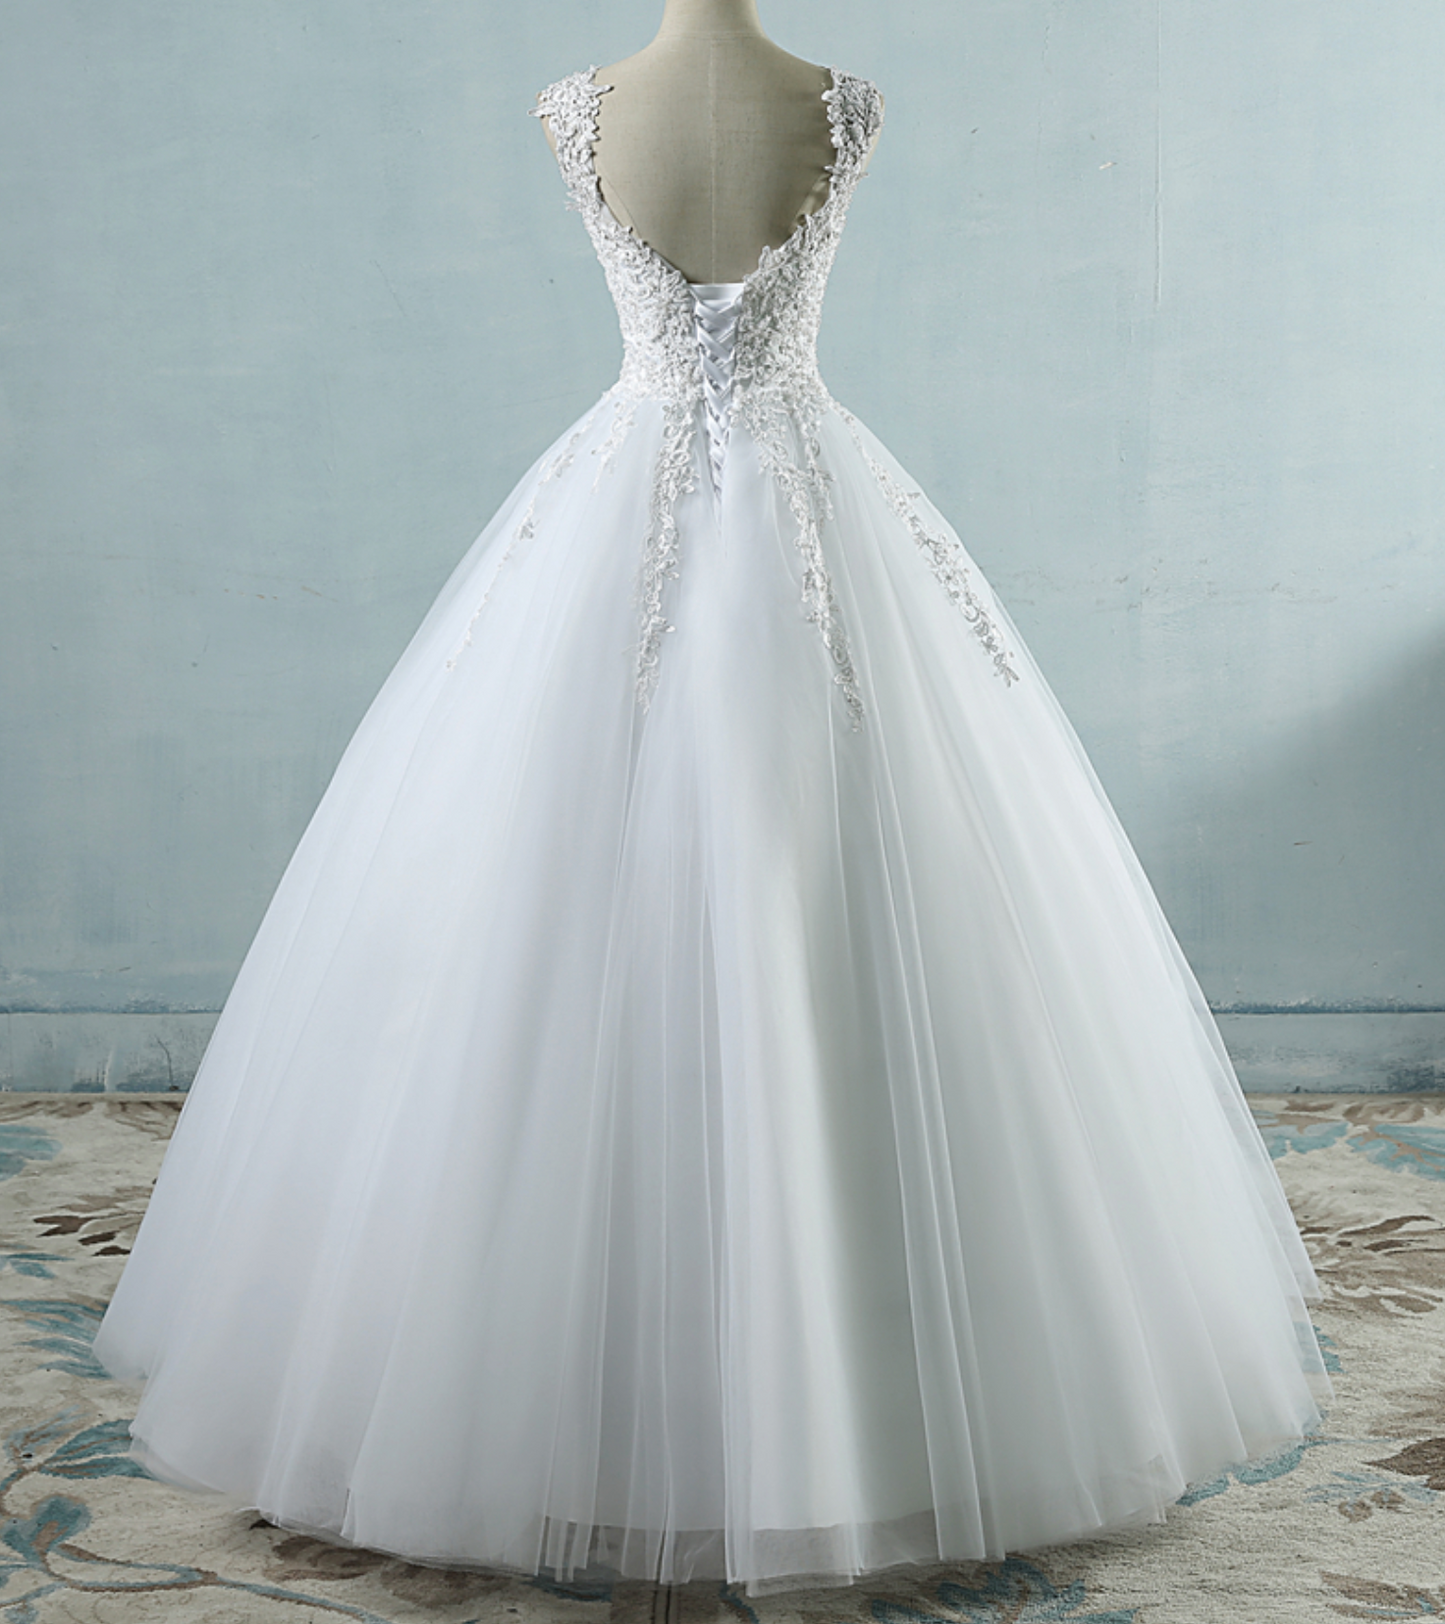 Tulle Wedding Dress with Pearls and Lace Appliques - TulleLux Bridal Crowns &  Accessories 